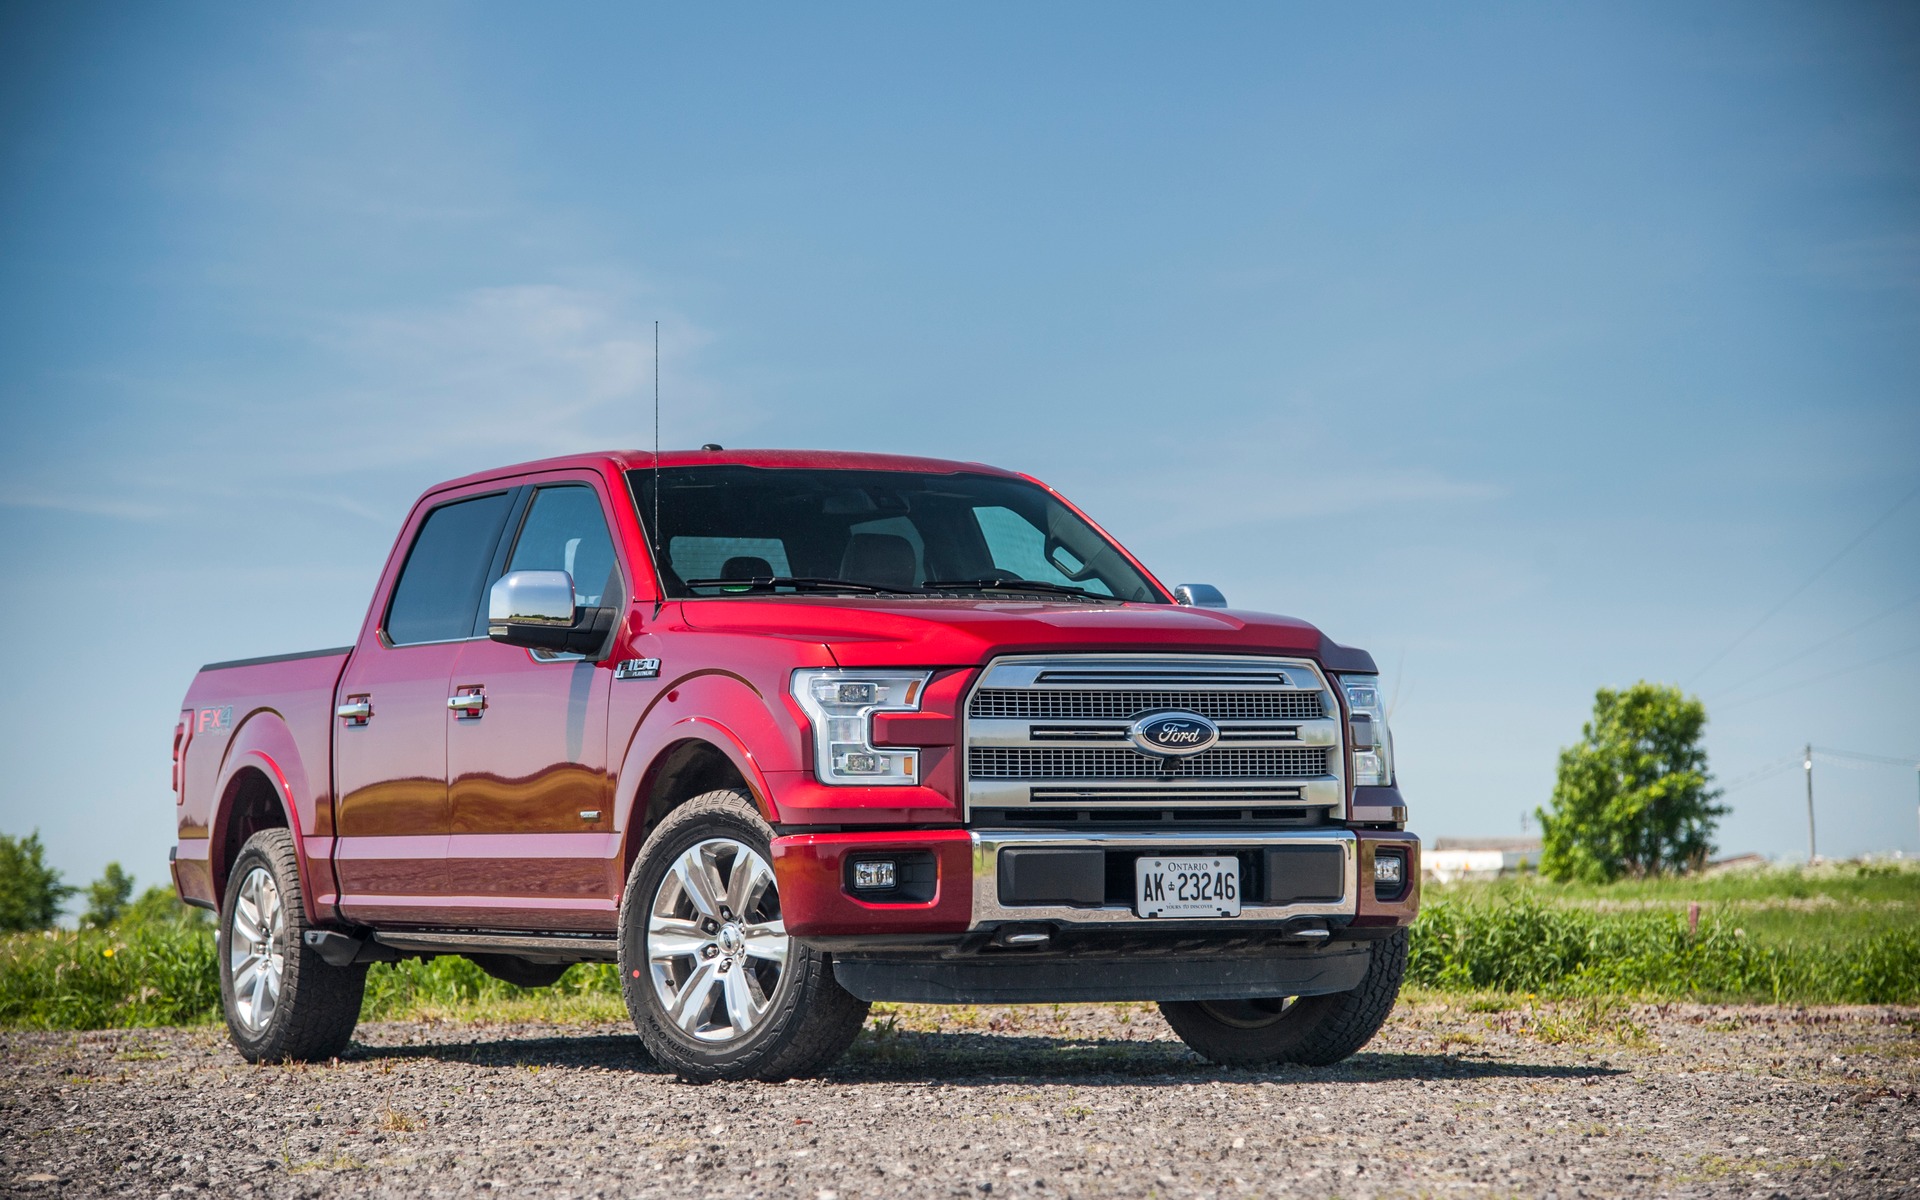 17 Ford F 150 News Reviews Picture Galleries And Videos The Car Guide